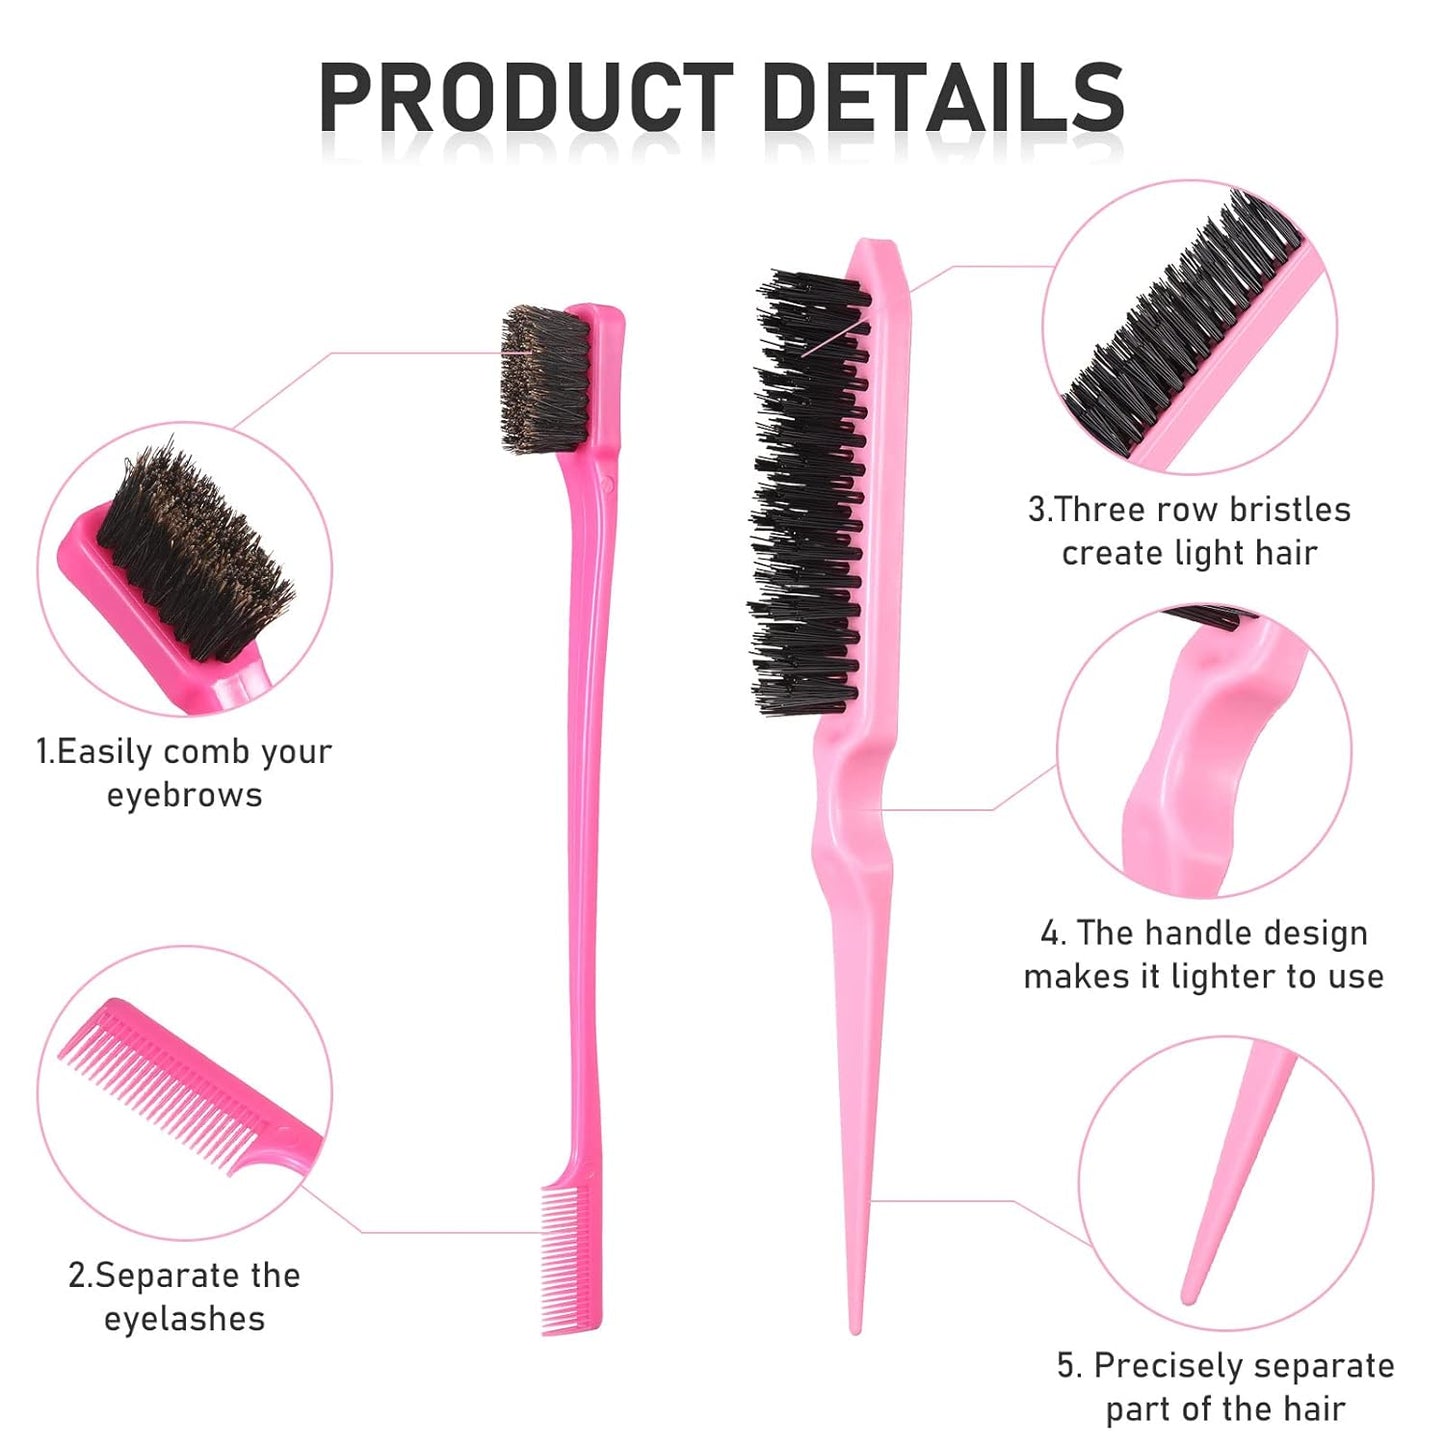 12 Pieces Hair Brush Set, Nylon Teasing Hair Brushes 3 Row Salon Teasing Brush, Double Sided Hair Edge Brush Smooth Comb Grooming, Rat Tail Combs with Duckbill Clips for Women Girls (Purple, Black)